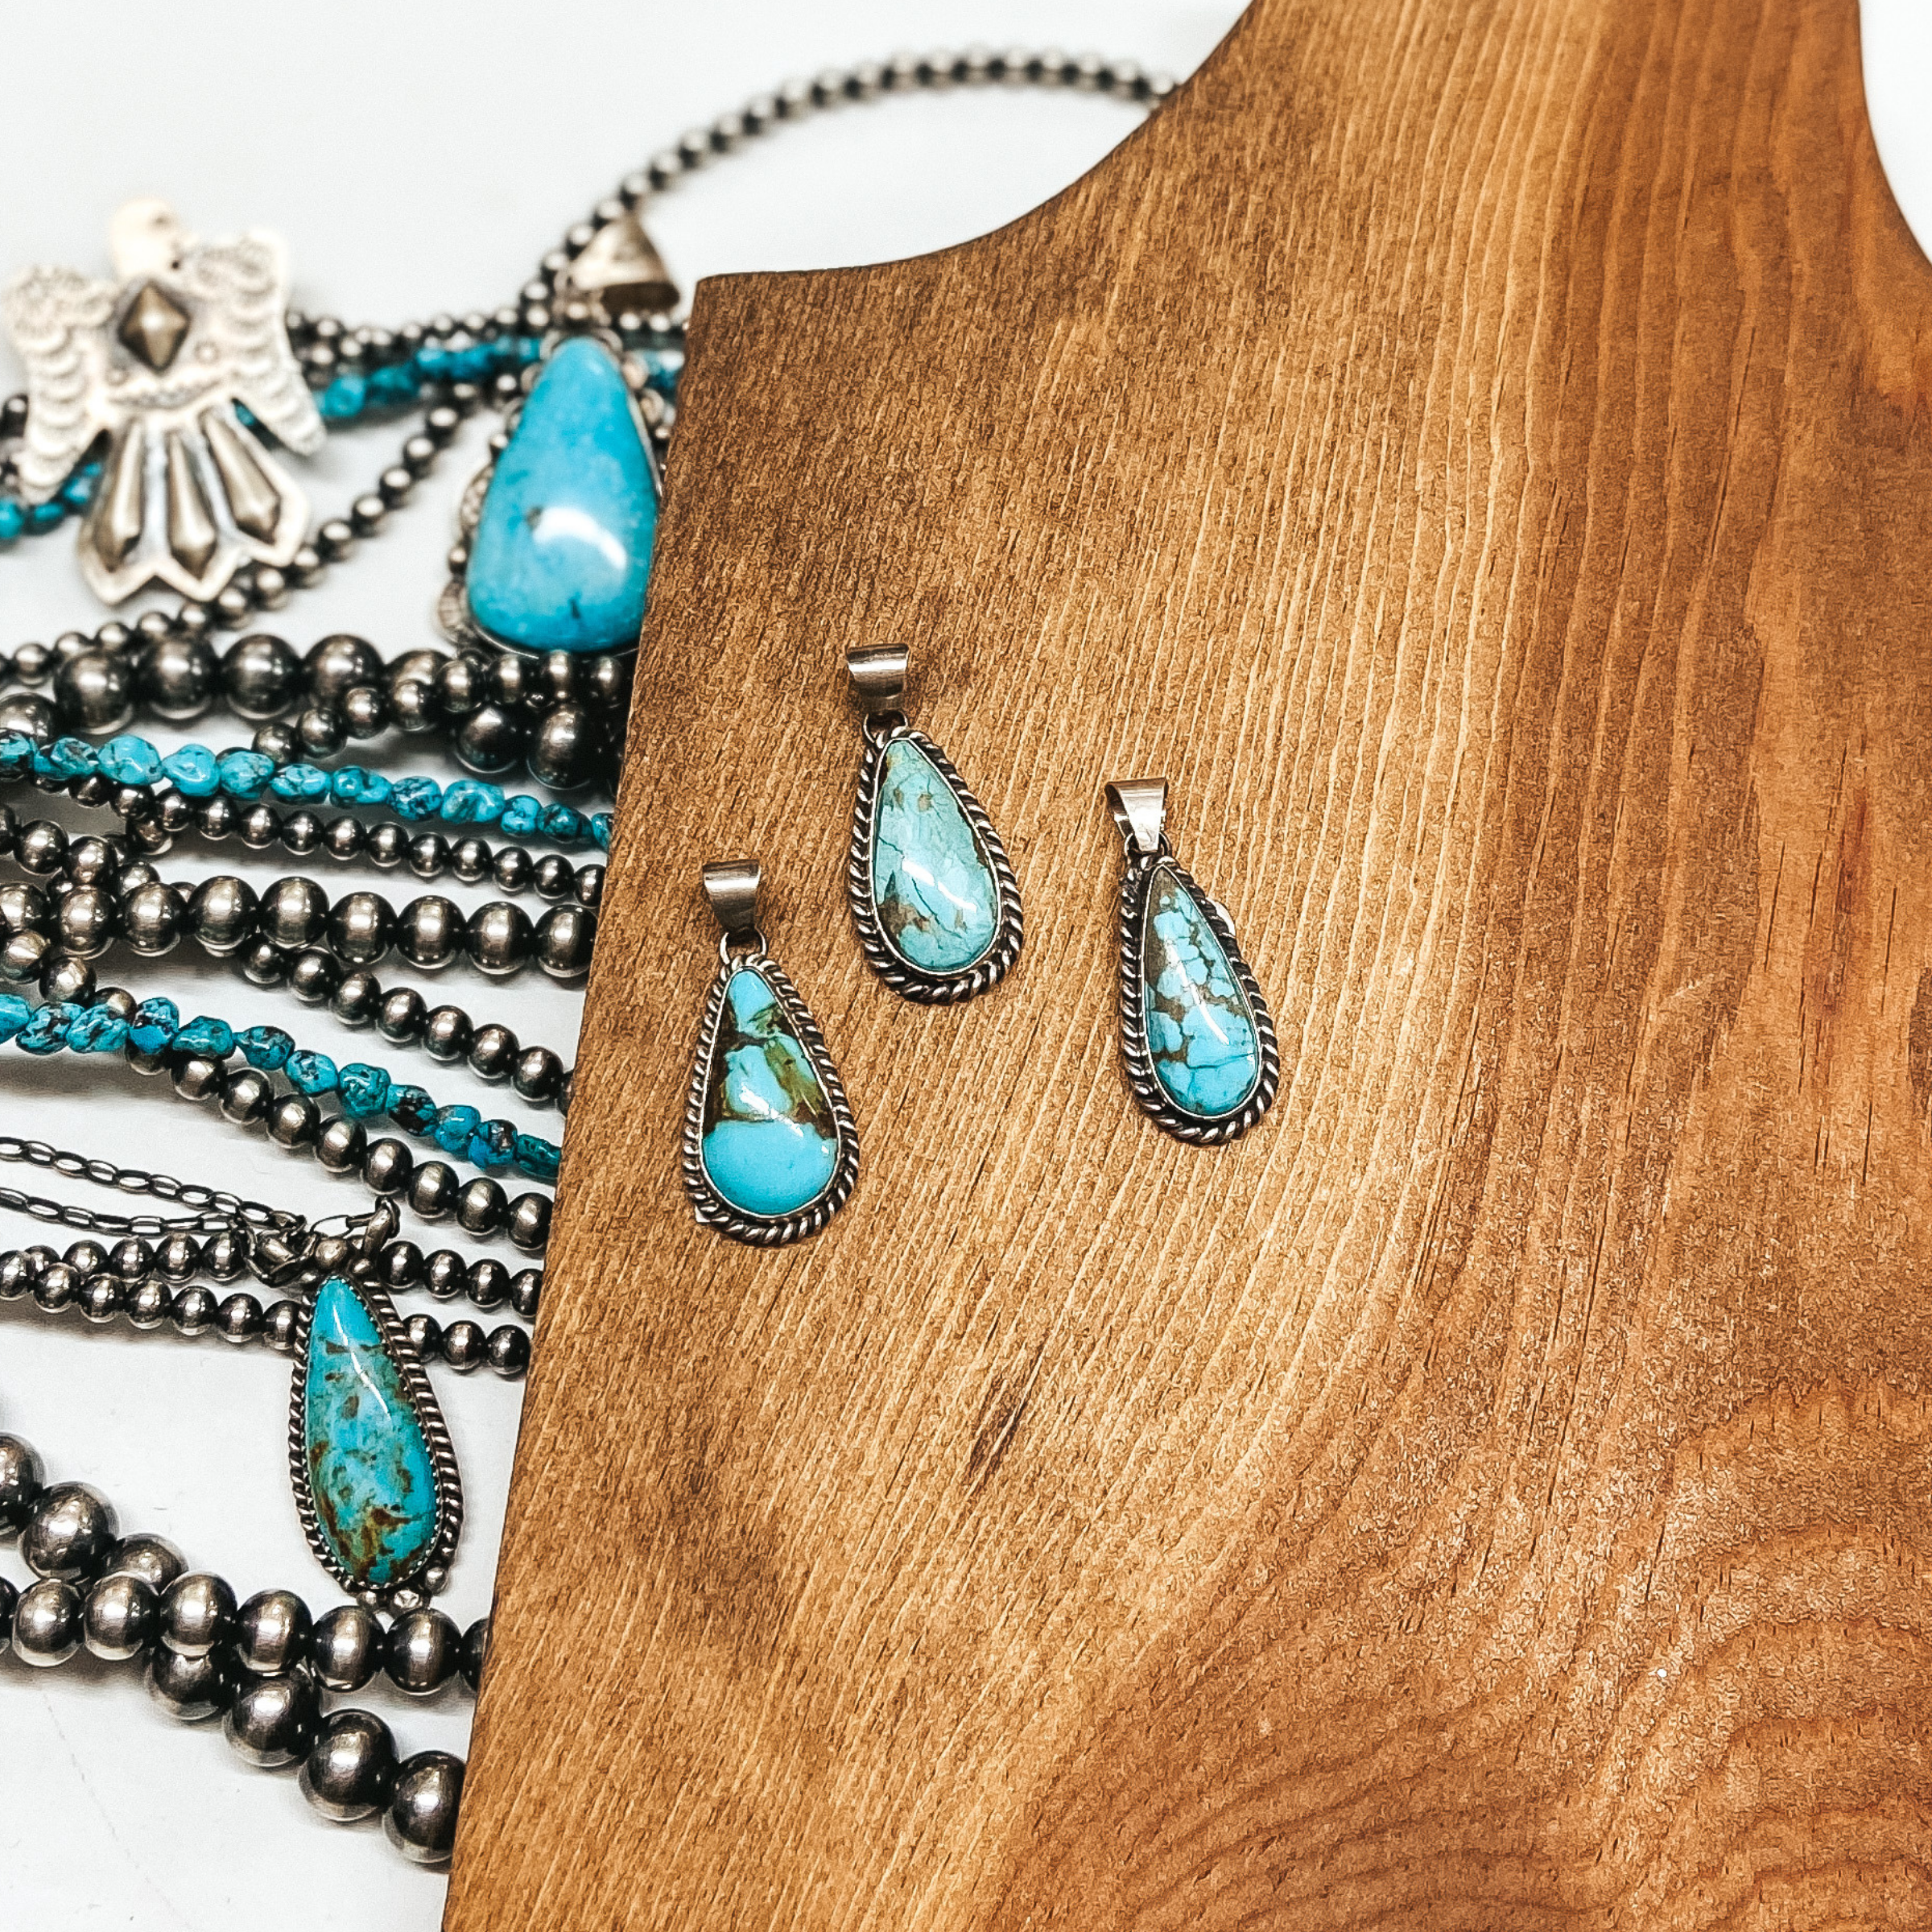 Three turquoise teardrop pendants pictured on wooden background with Navajo pearls and turquoise jewelry.